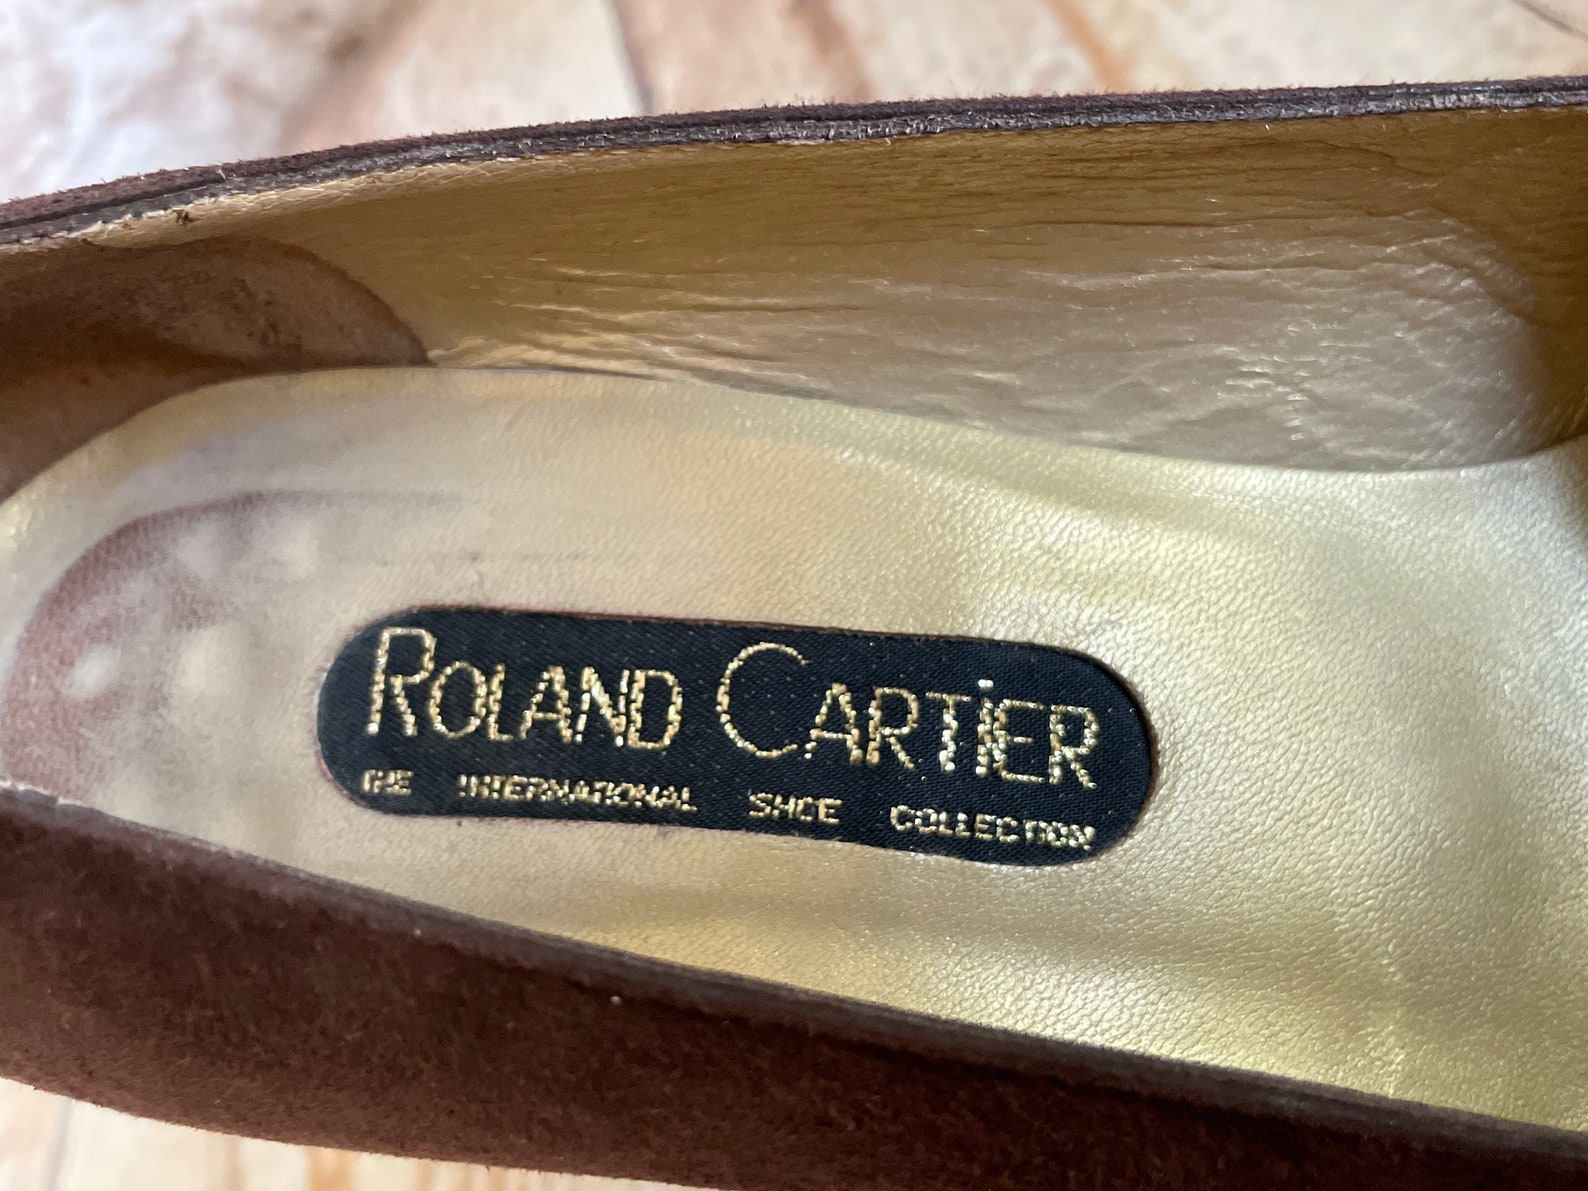 Vintage Shoes Pumps By Roland Cartier In Brown Suede Leather | Etsy